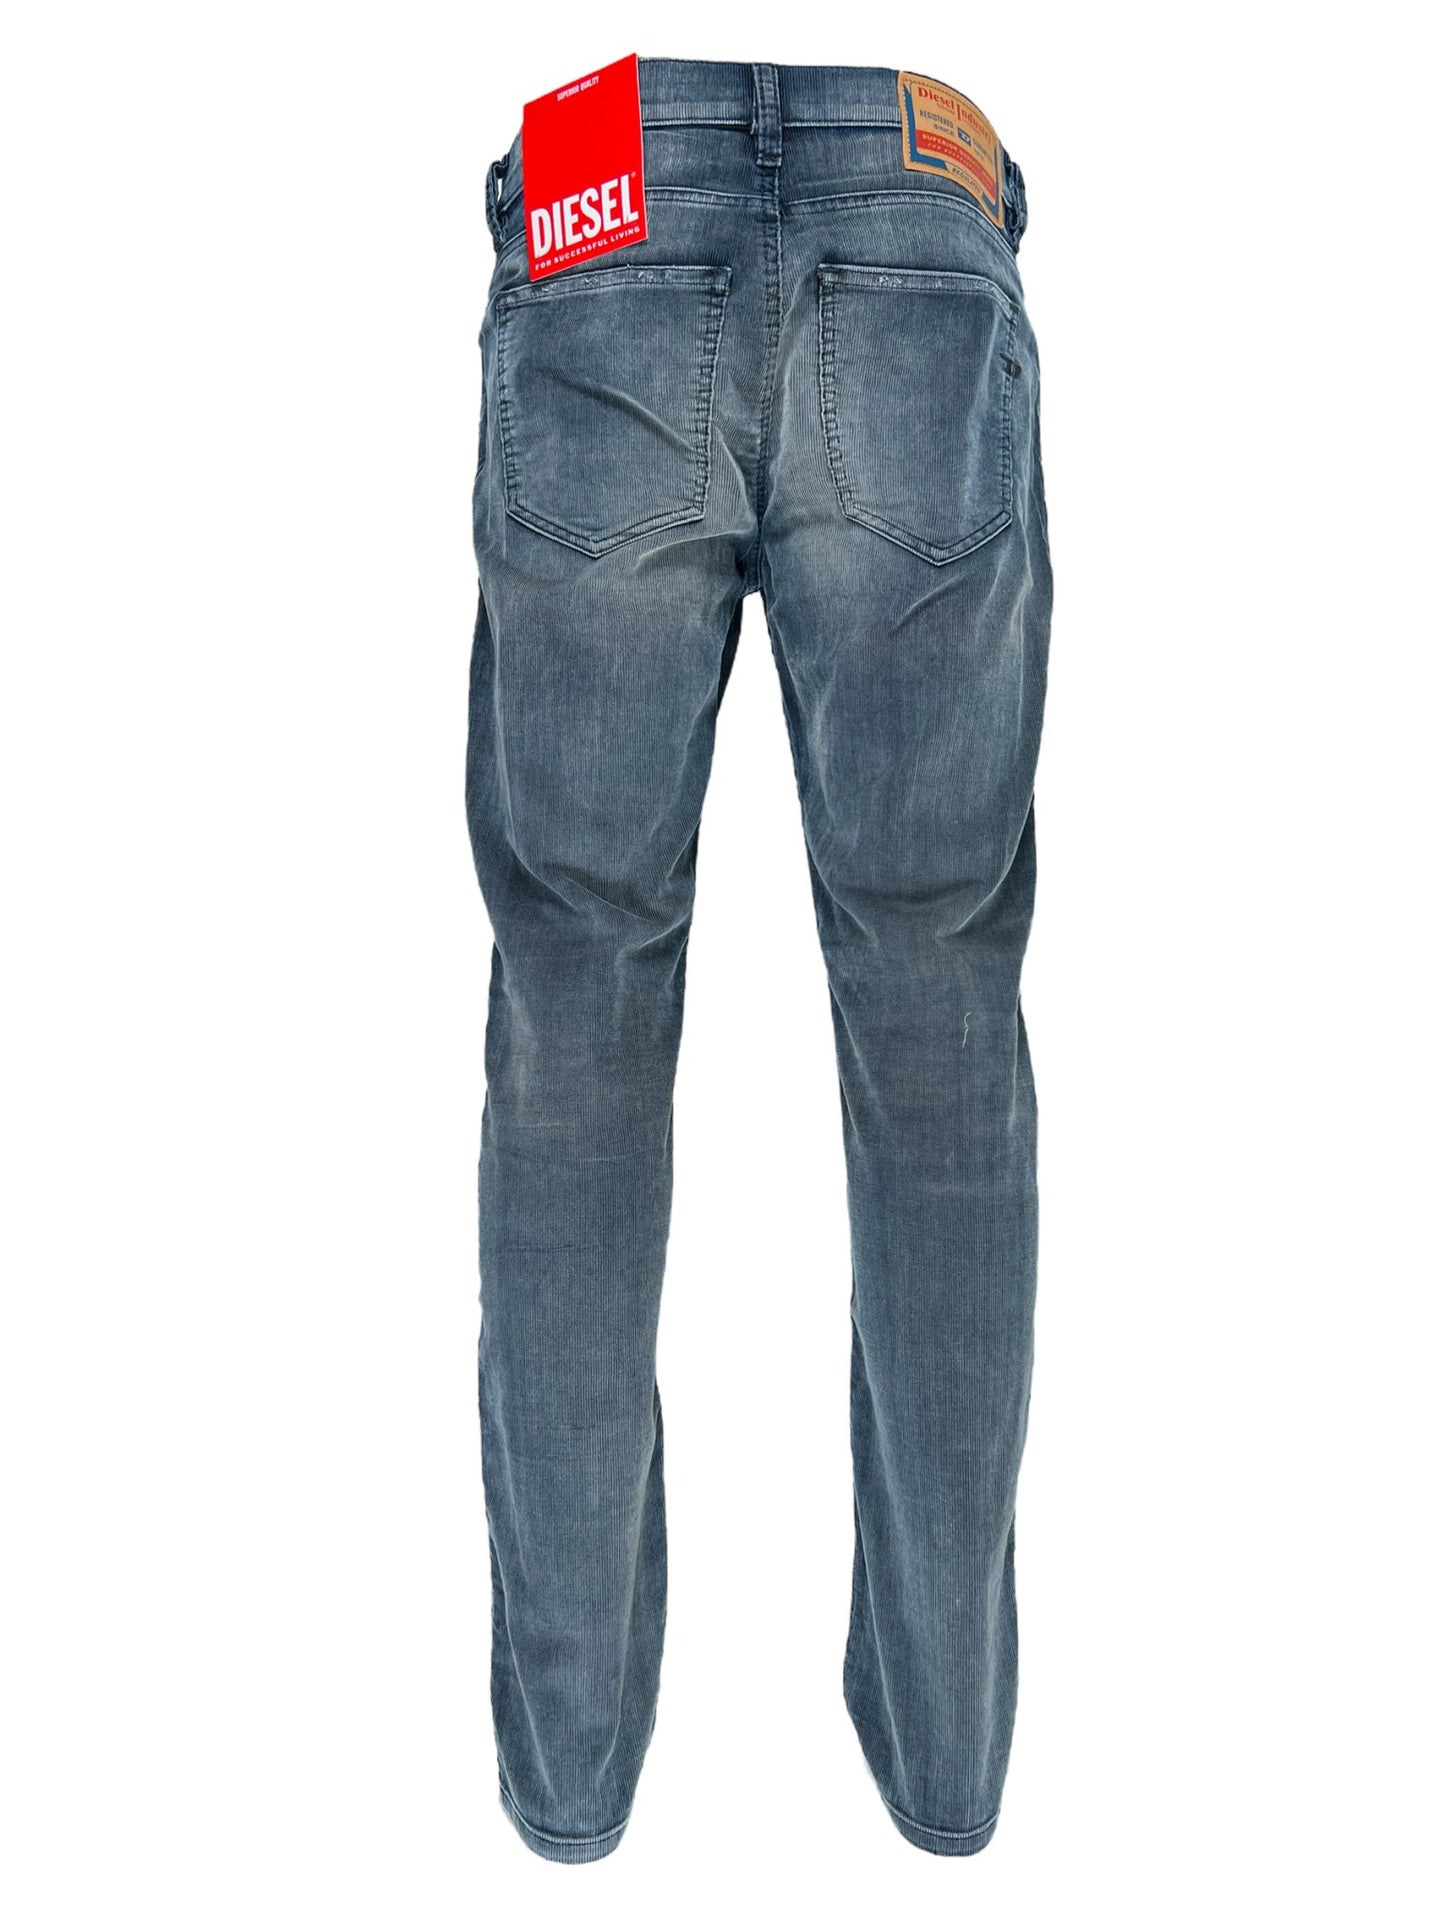 A pair of DIESEL brand slim jeans with a visible logo tag on a white background.